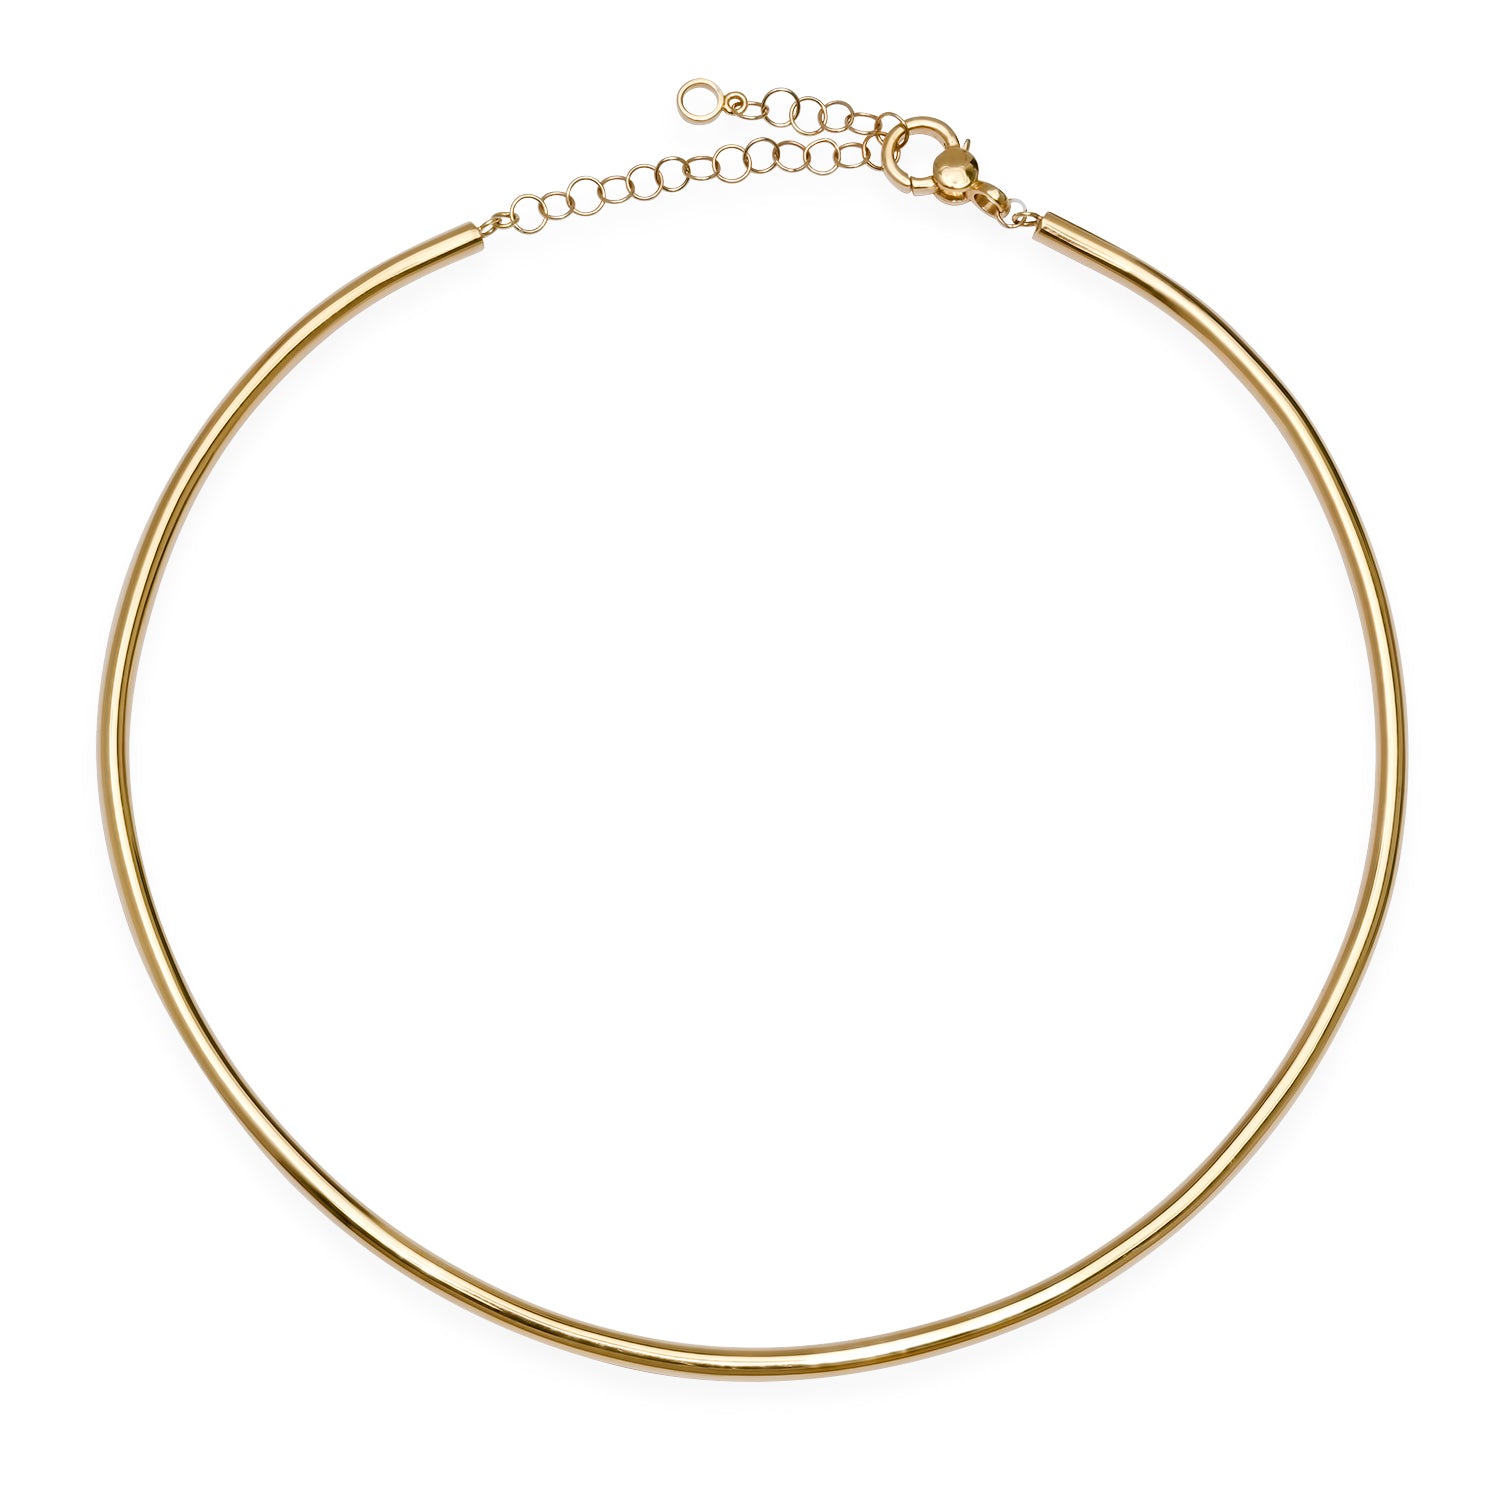 Glimmer Gold Collar Choker Necklace